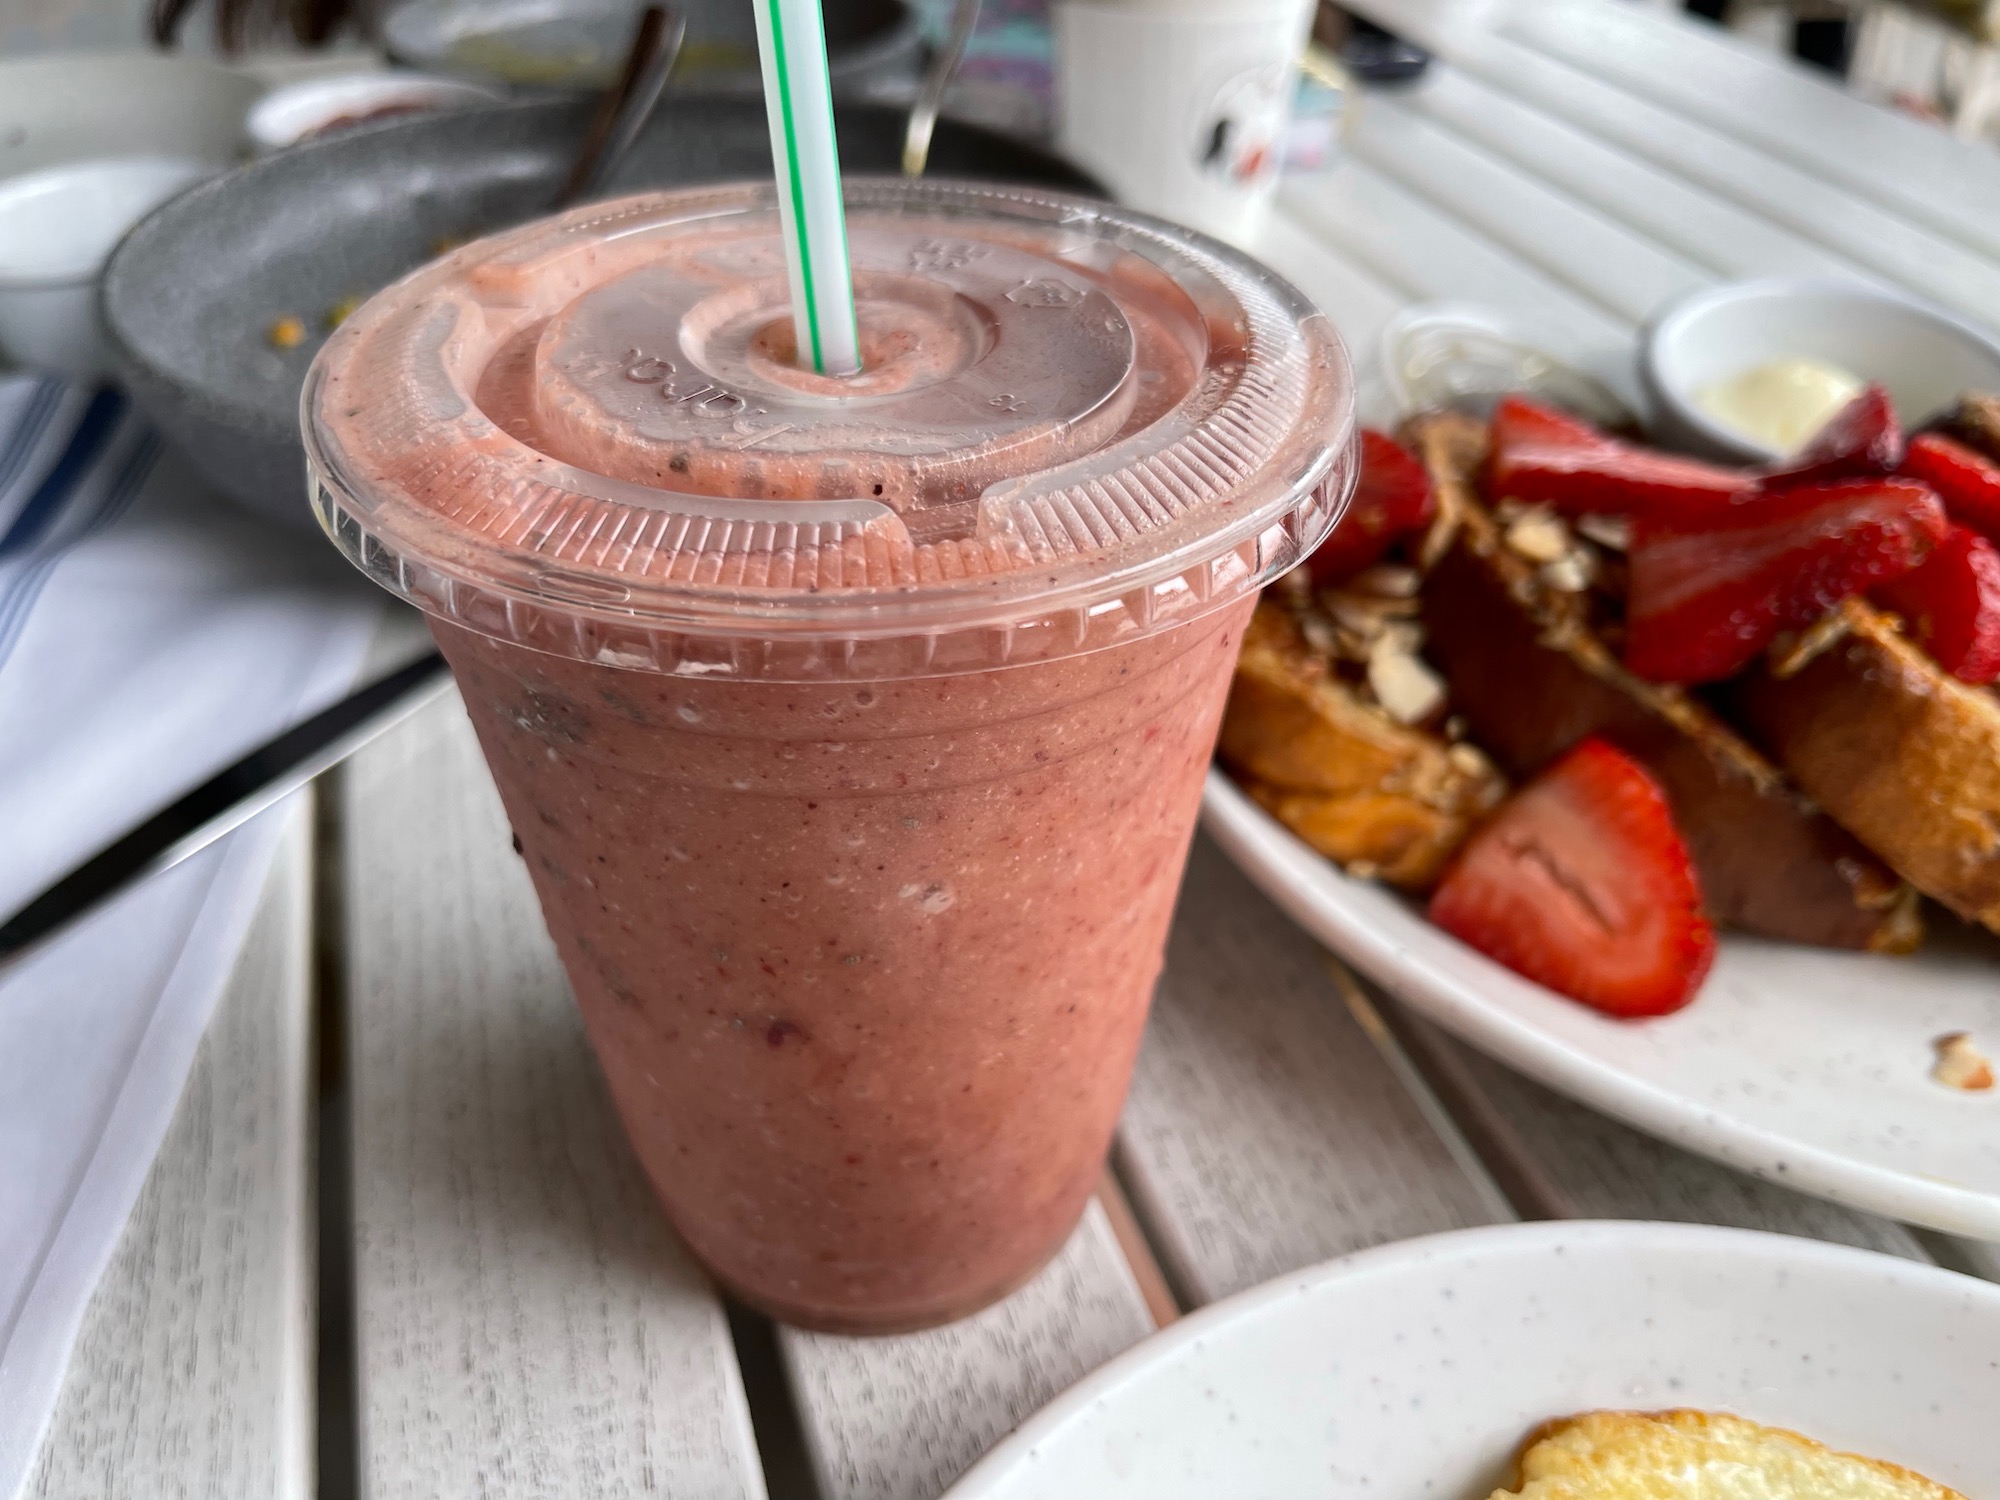 a pink smoothie in a plastic cup with straw and a plate of food